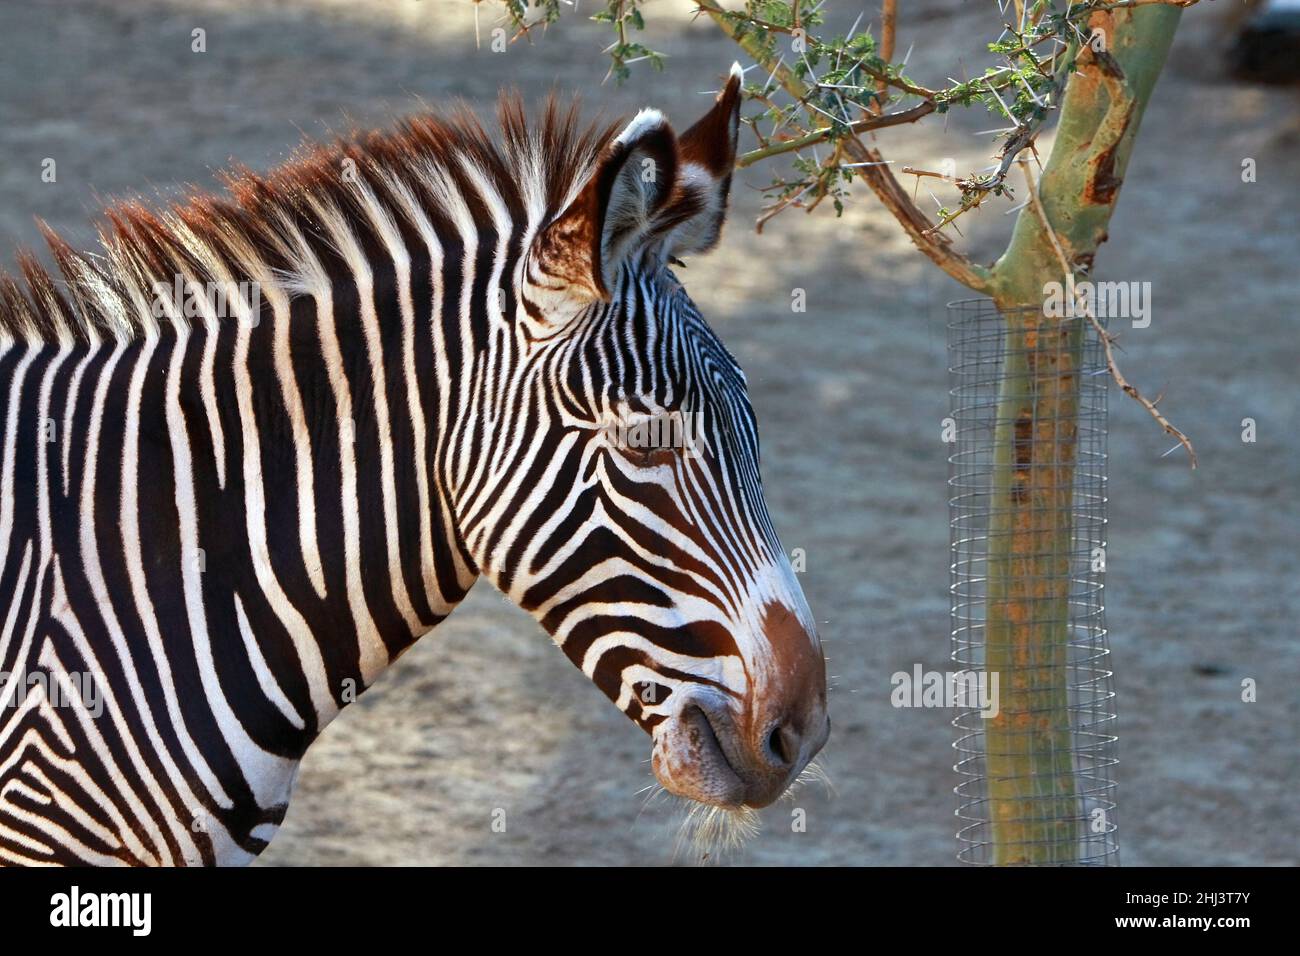 Cool Zebra in a protected area, animals of Africa. Zoo animals, animals with coarse hair. Stock Photo